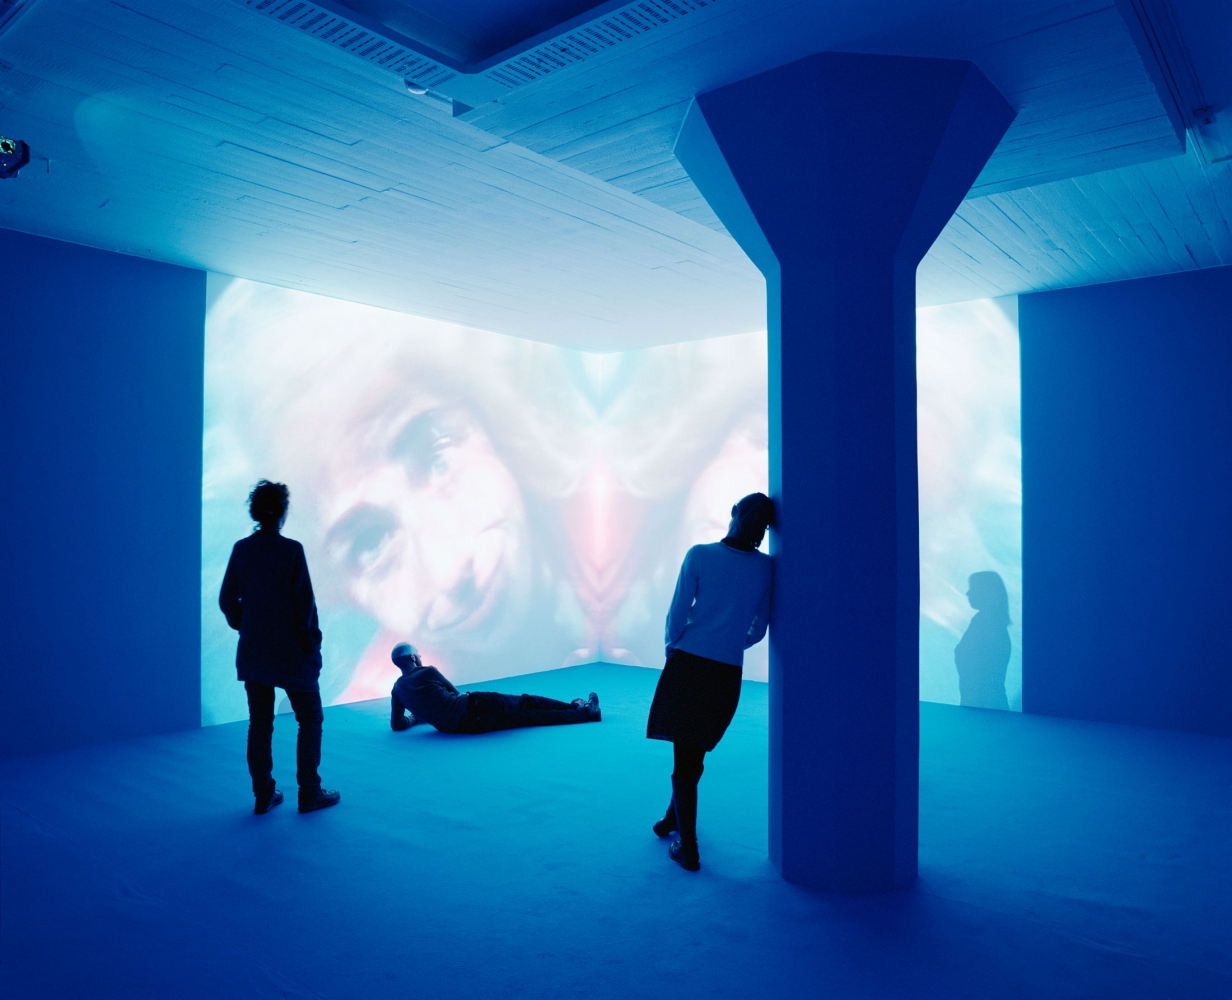 Pipilotti Rist
Sip My Ocean, 1996
Two-channel video and sound installation, color, with carpet
Duration: 10 minutes, 22 seconds
Installation view, Magasin III, Stockholm, 2007